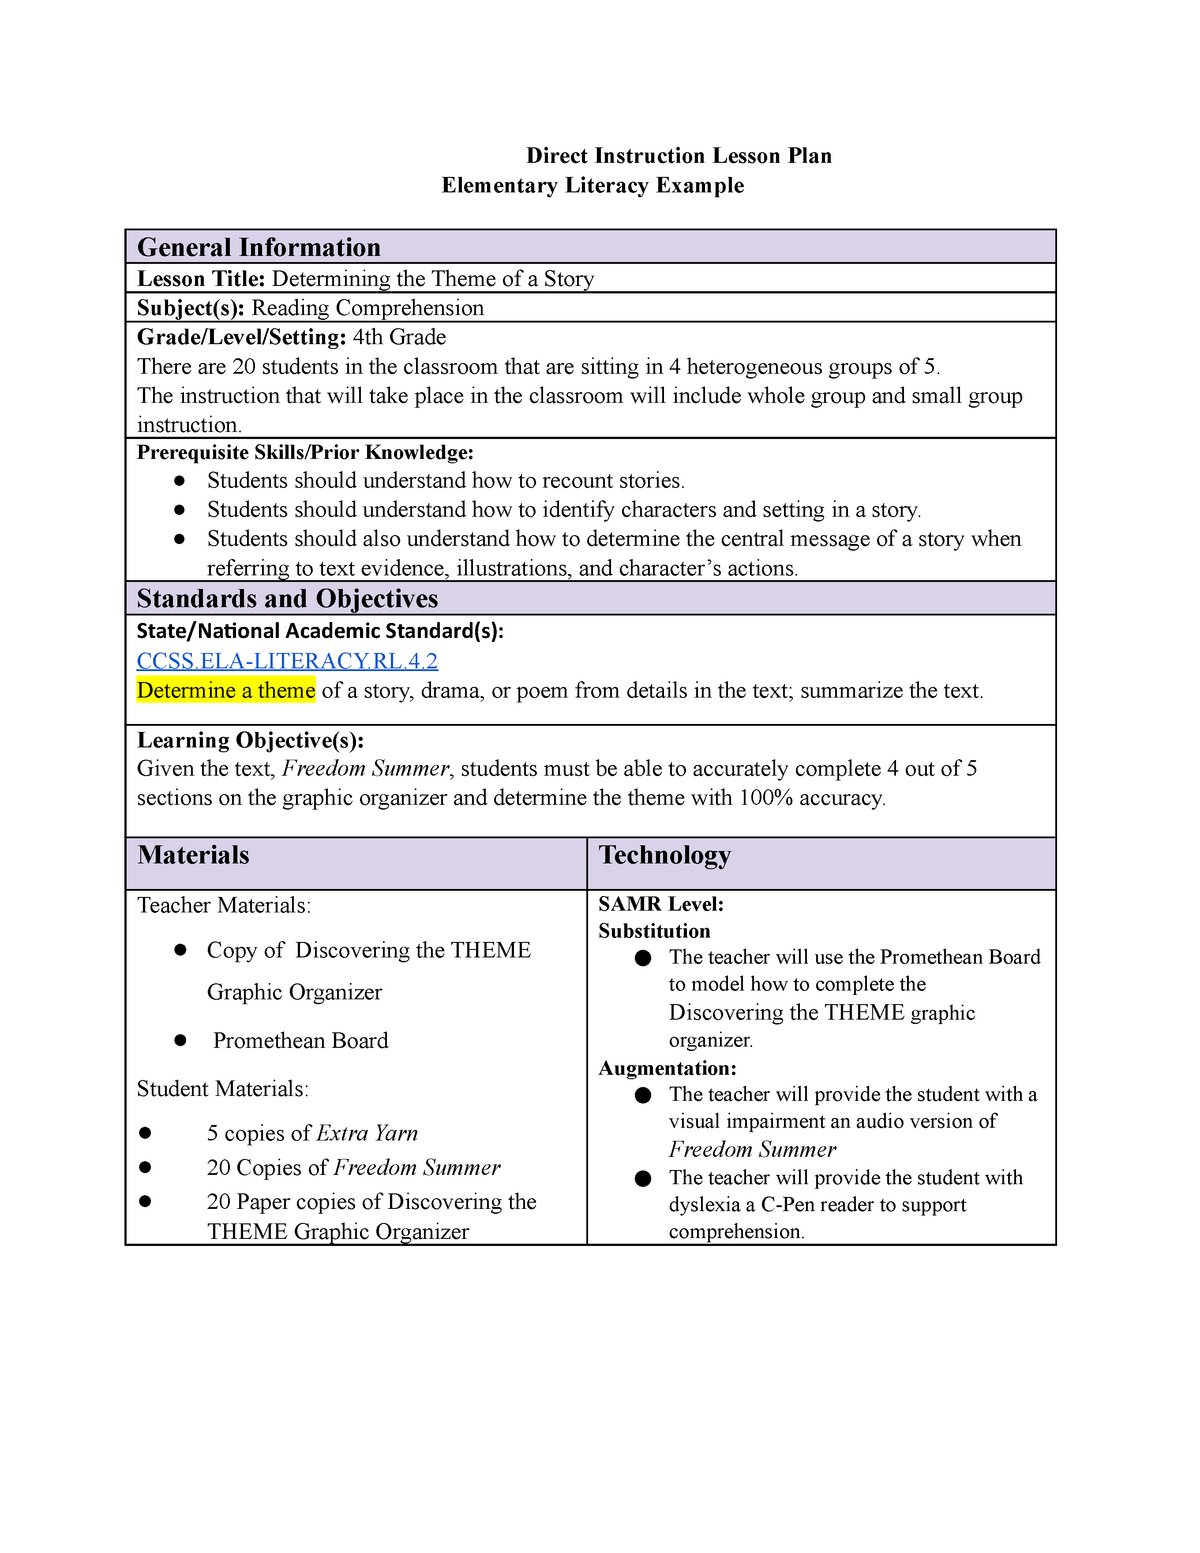 Direct Instruction Lesson Plan Example Theme Freedom Summer Direct Instruction Lesson Plan 